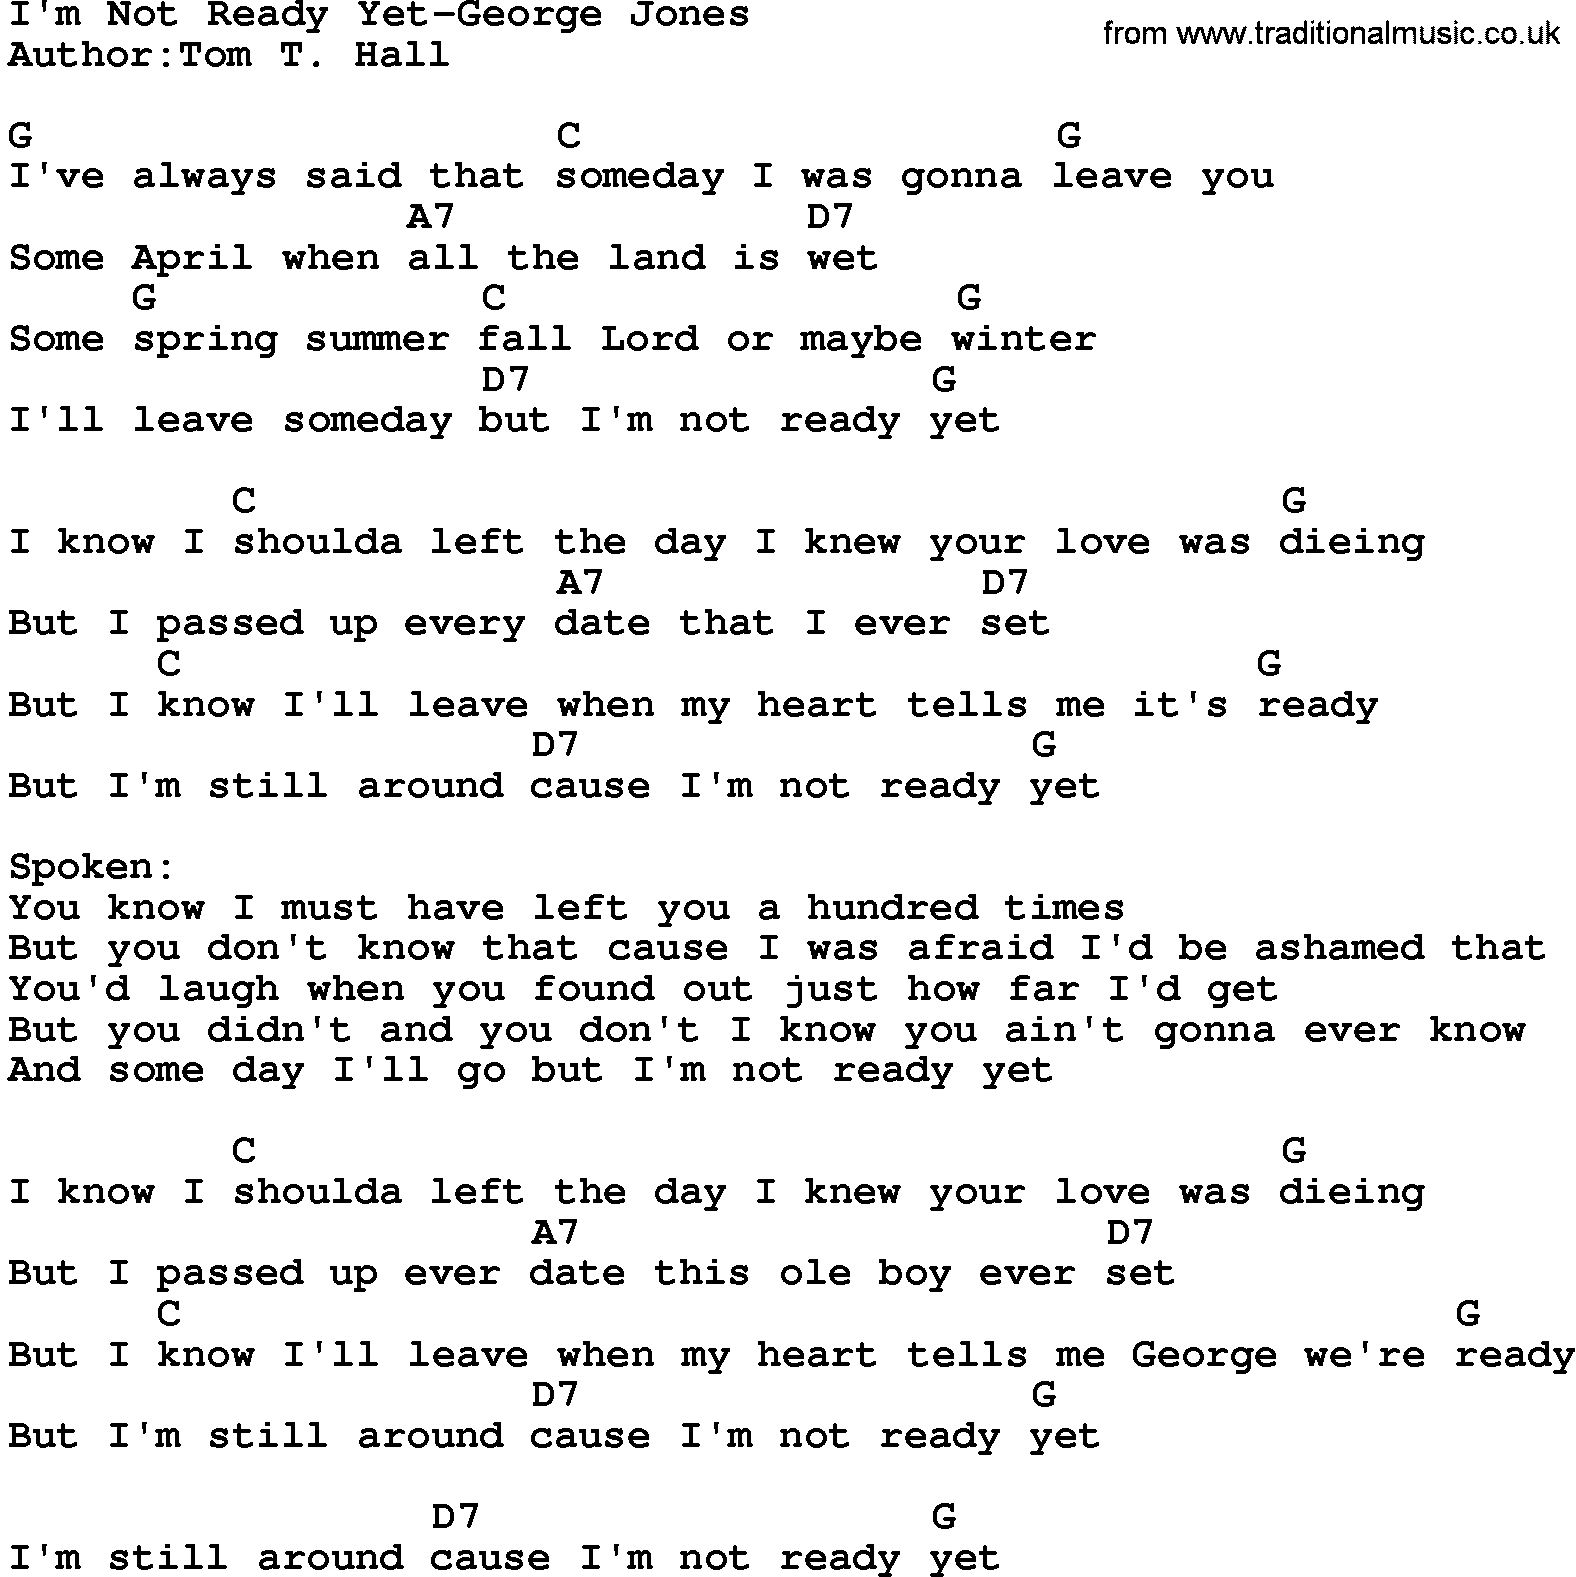 Country music song: I'm Not Ready Yet-George Jones lyrics and chords